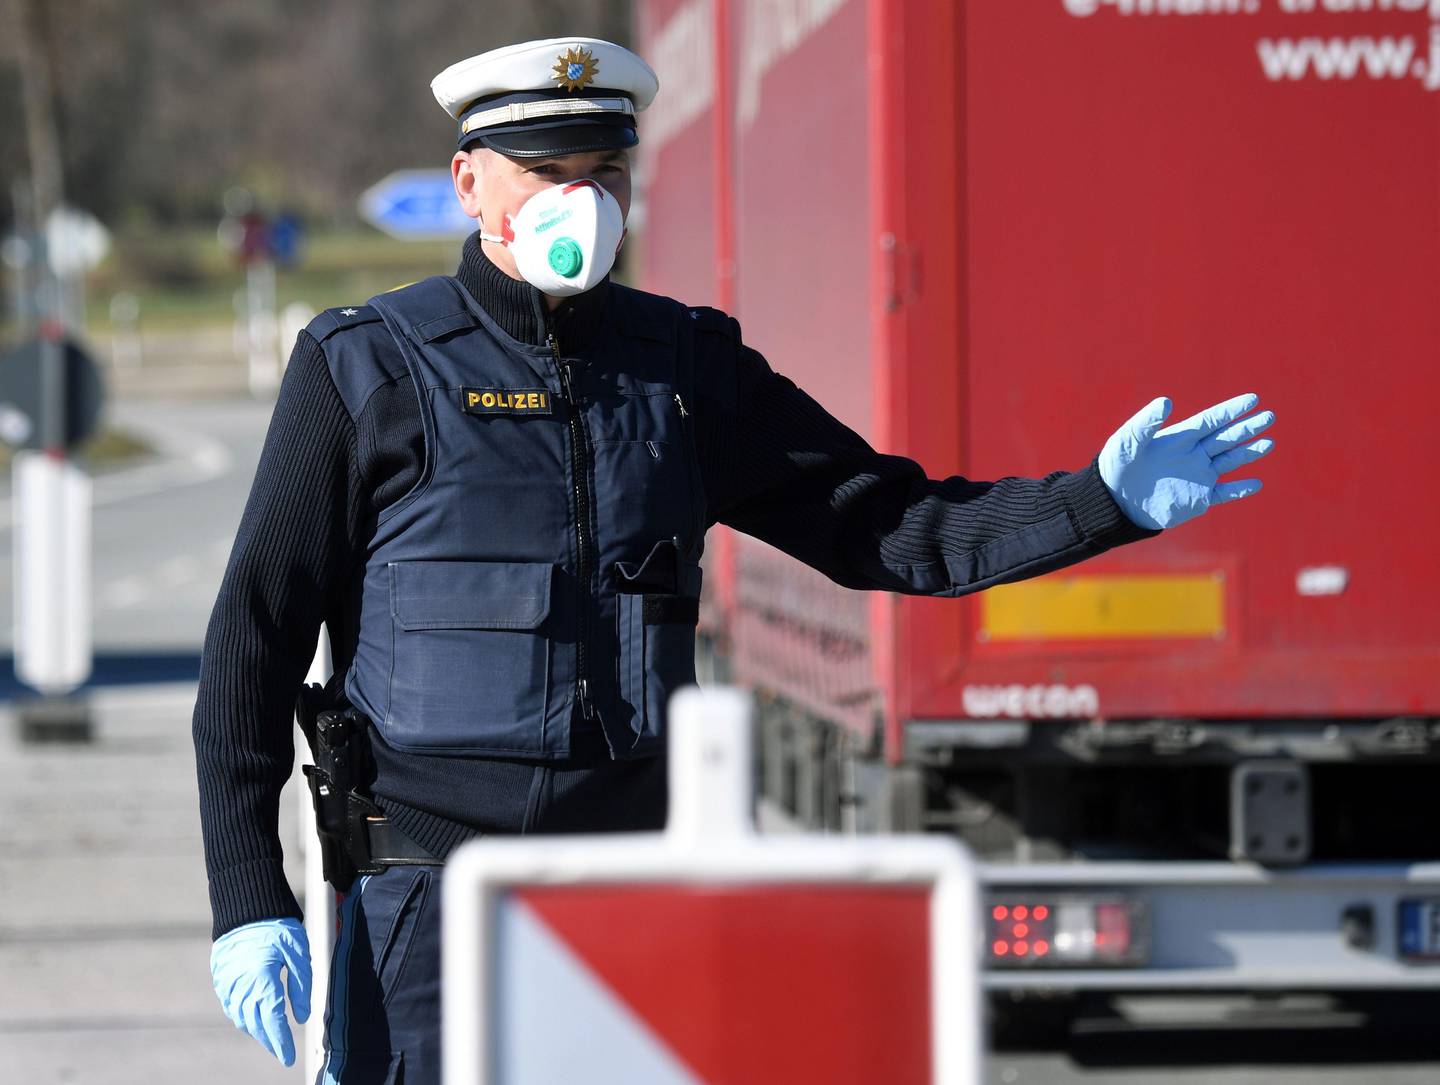 A German police officer, wearing a face mask, stops a driver at the border crossing between Austria and Germany, near the German village of Oberaudorf, as Germany imposes border controls with five countries in a virus fightback, on March 16, 2020. - Germany introduced border controls with Austria, Denmark, France, Luxembourg and Switzerland in a bid to stem the coronavirus outbreak. Only those with a valid reason for travel, like cross-border commuters and delivery drivers, are allowed through, officials said. (Photo by Christof STACHE / AFP)